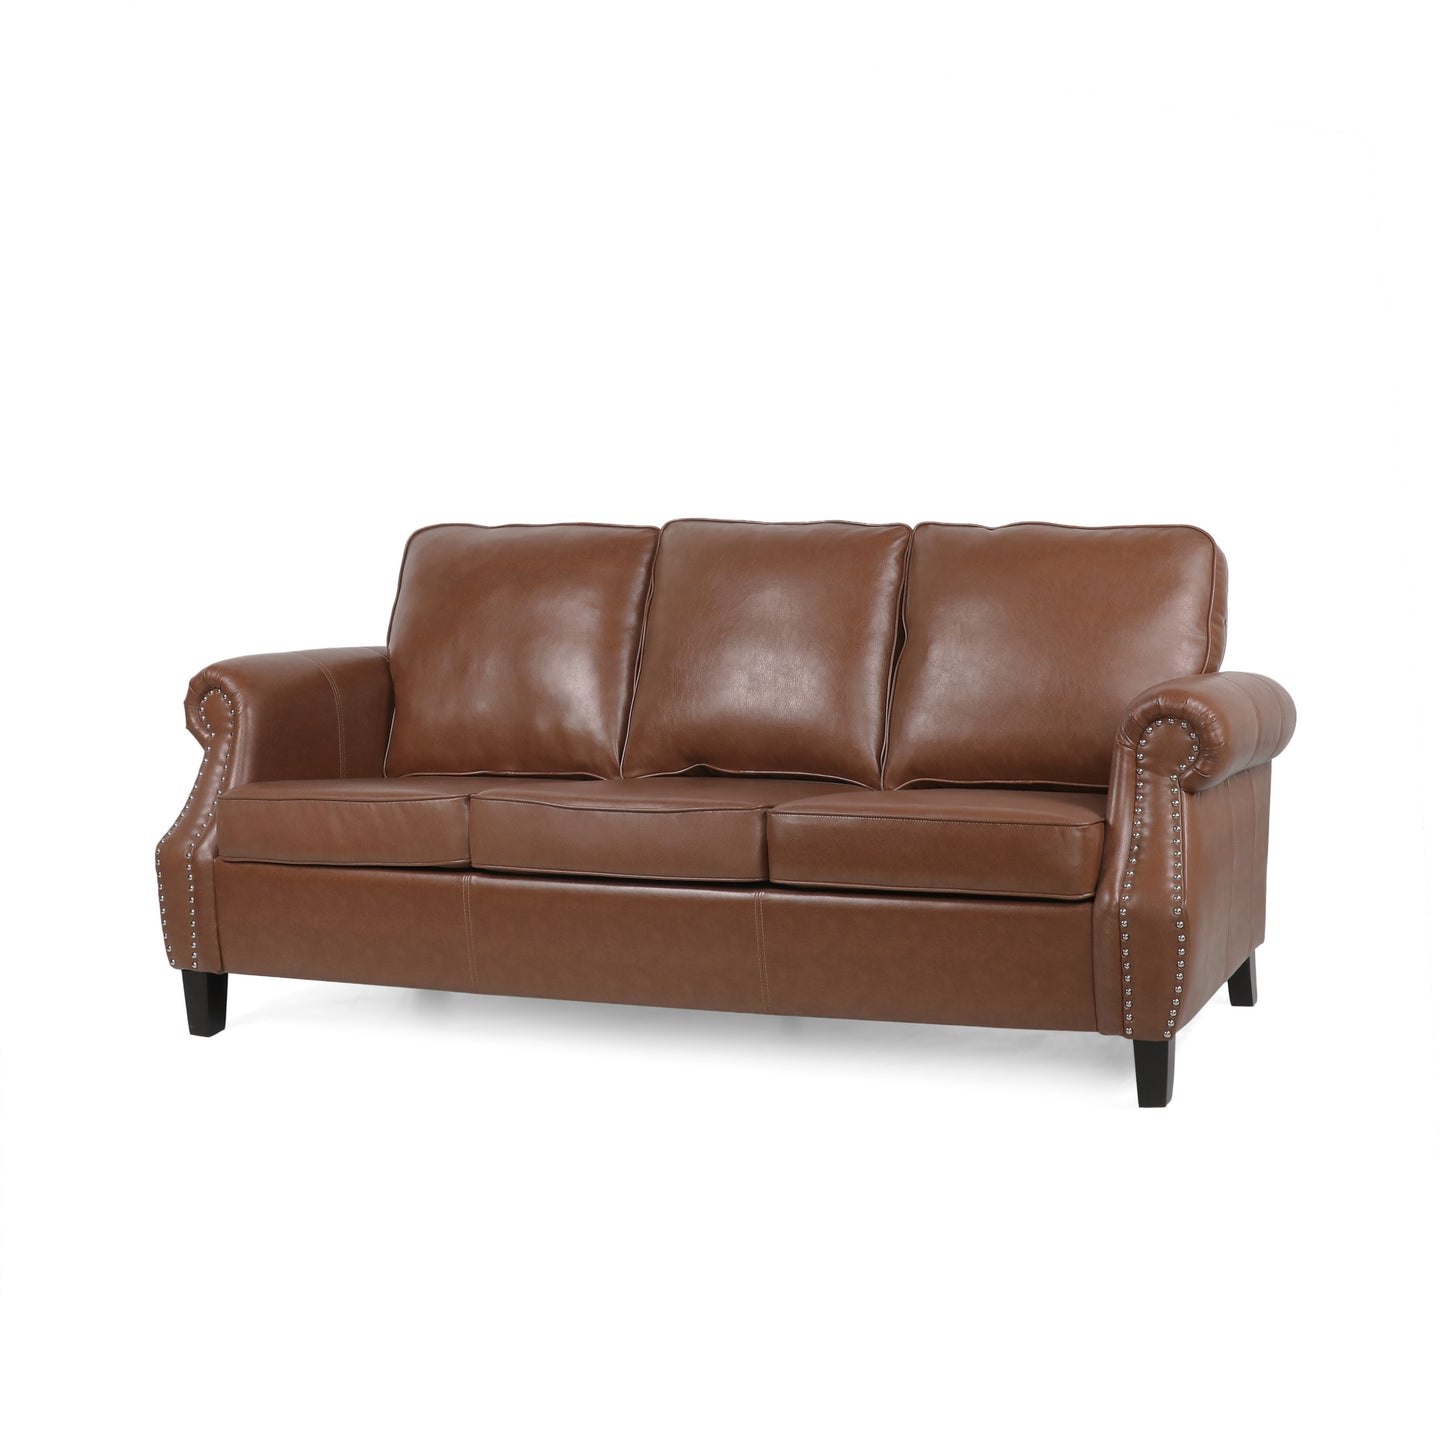 Burkehaven Contemporary Faux Leather 3 Seater Sofa with Nailhead Trim